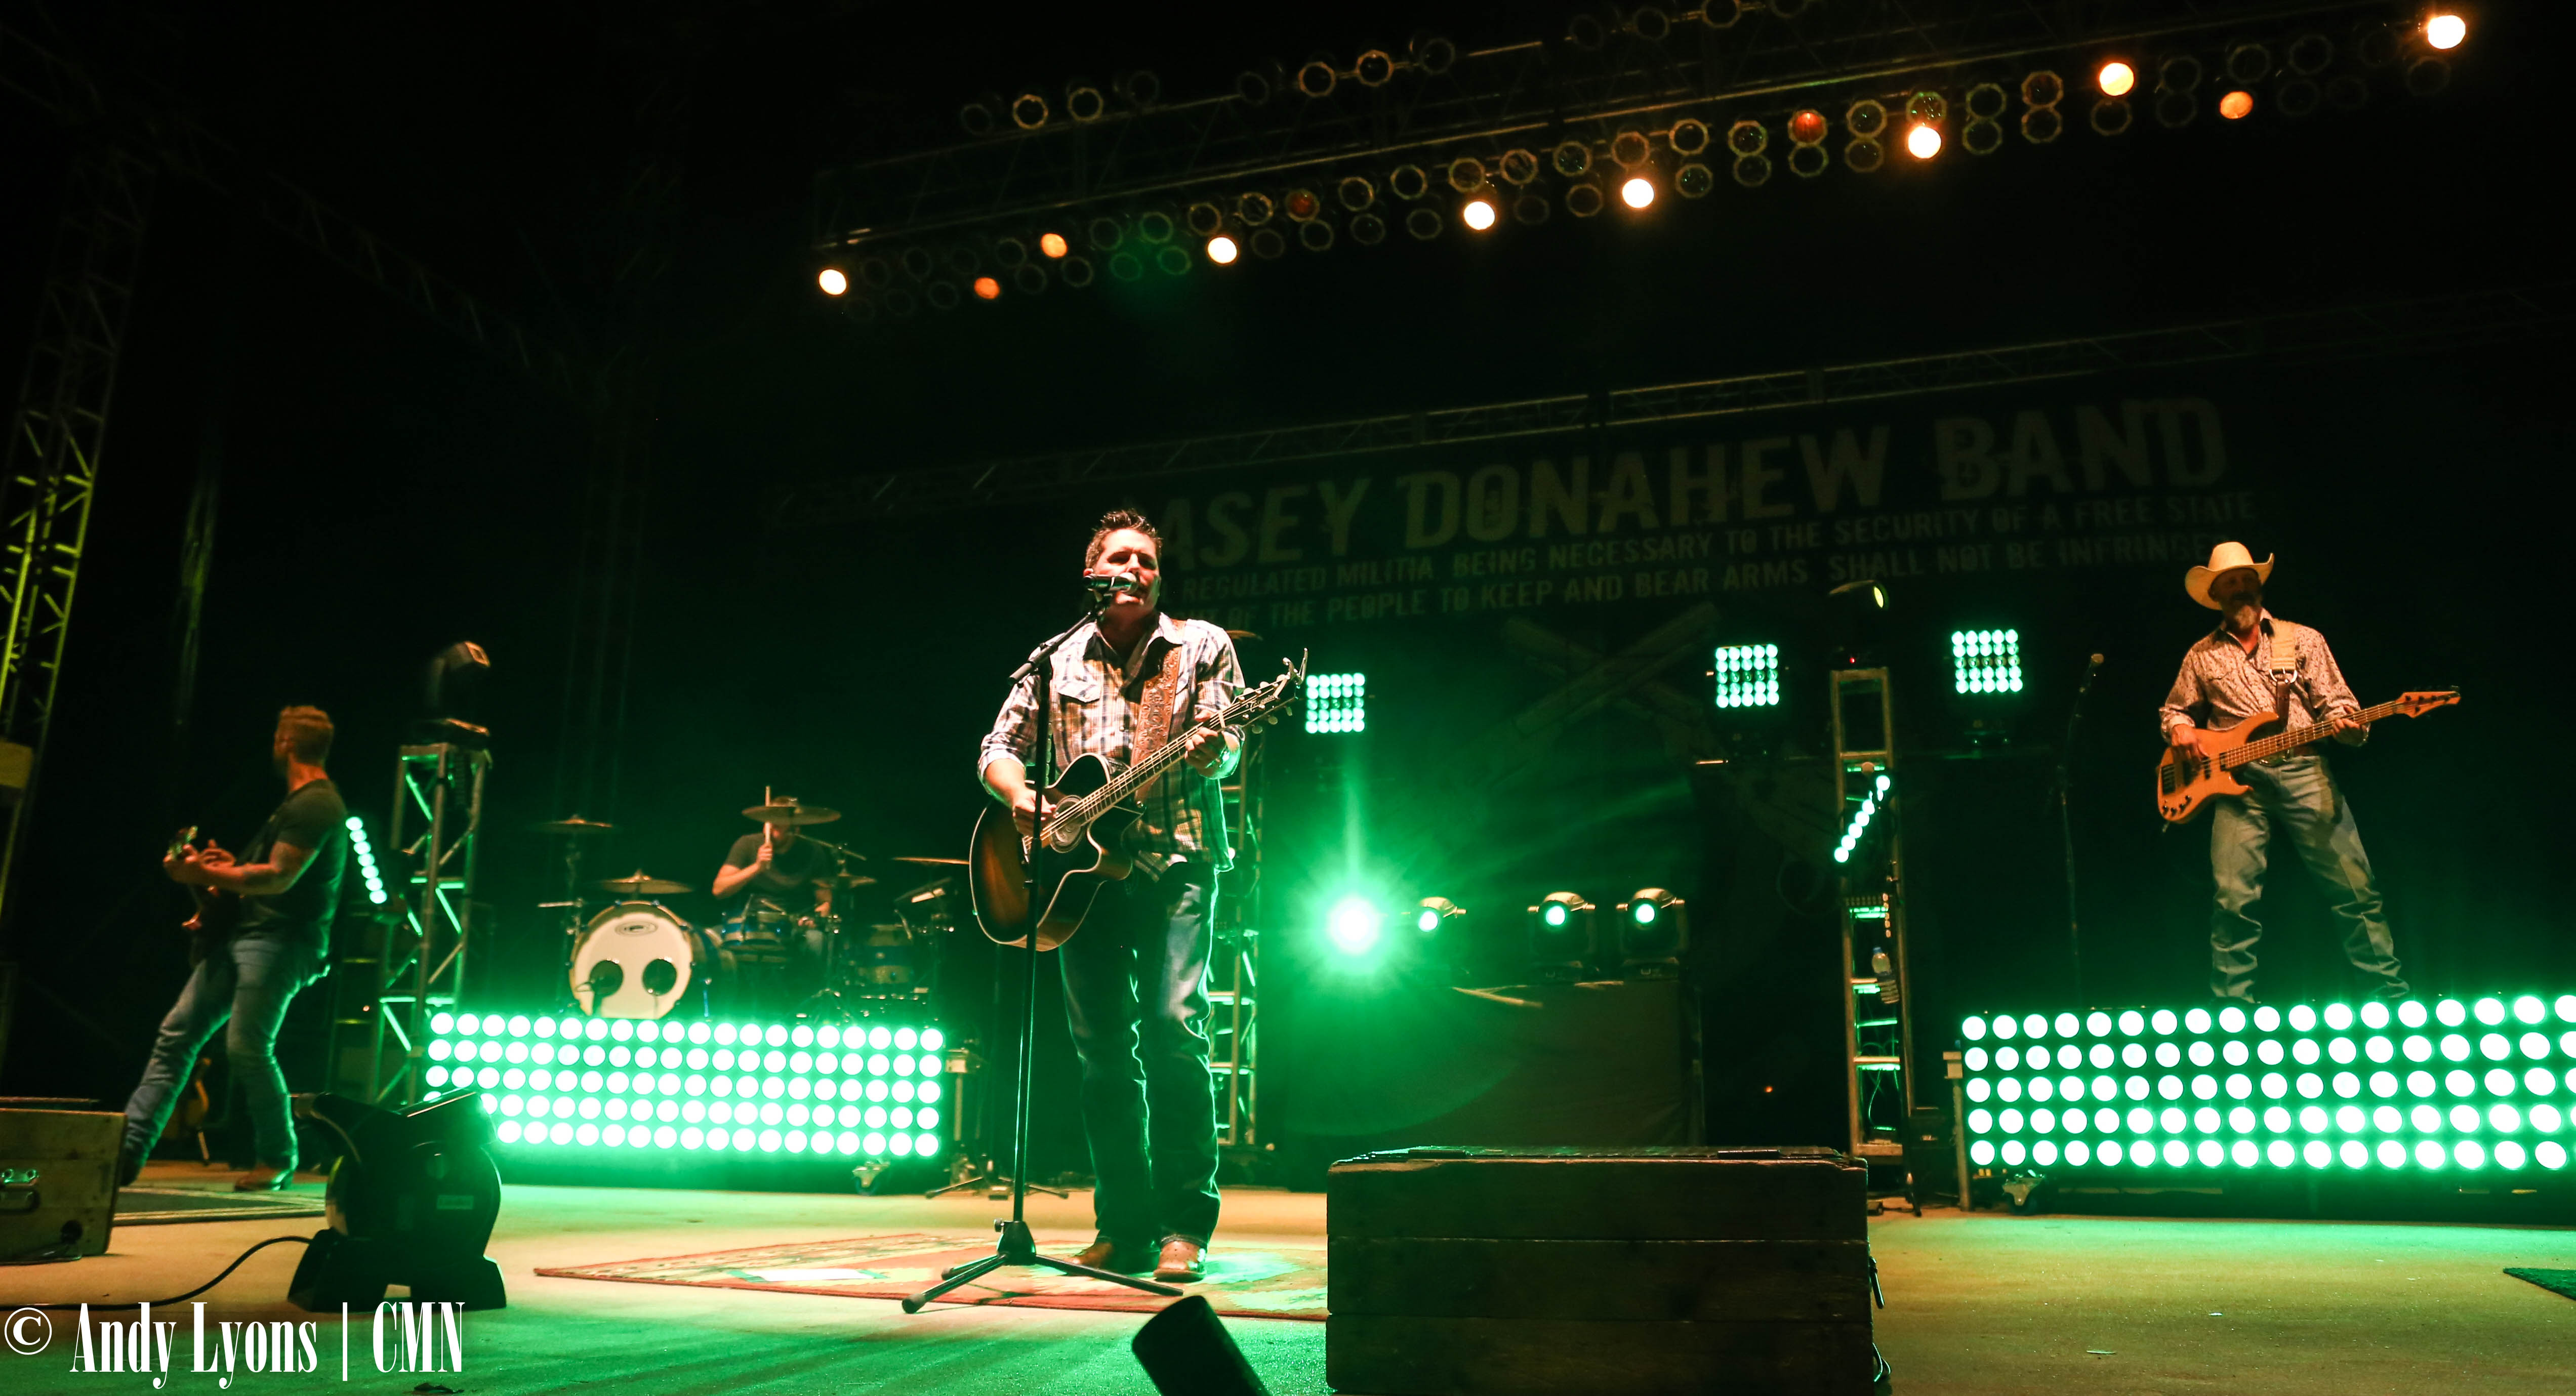 Despite being cut short, Red Dirt Country night rocks MSF